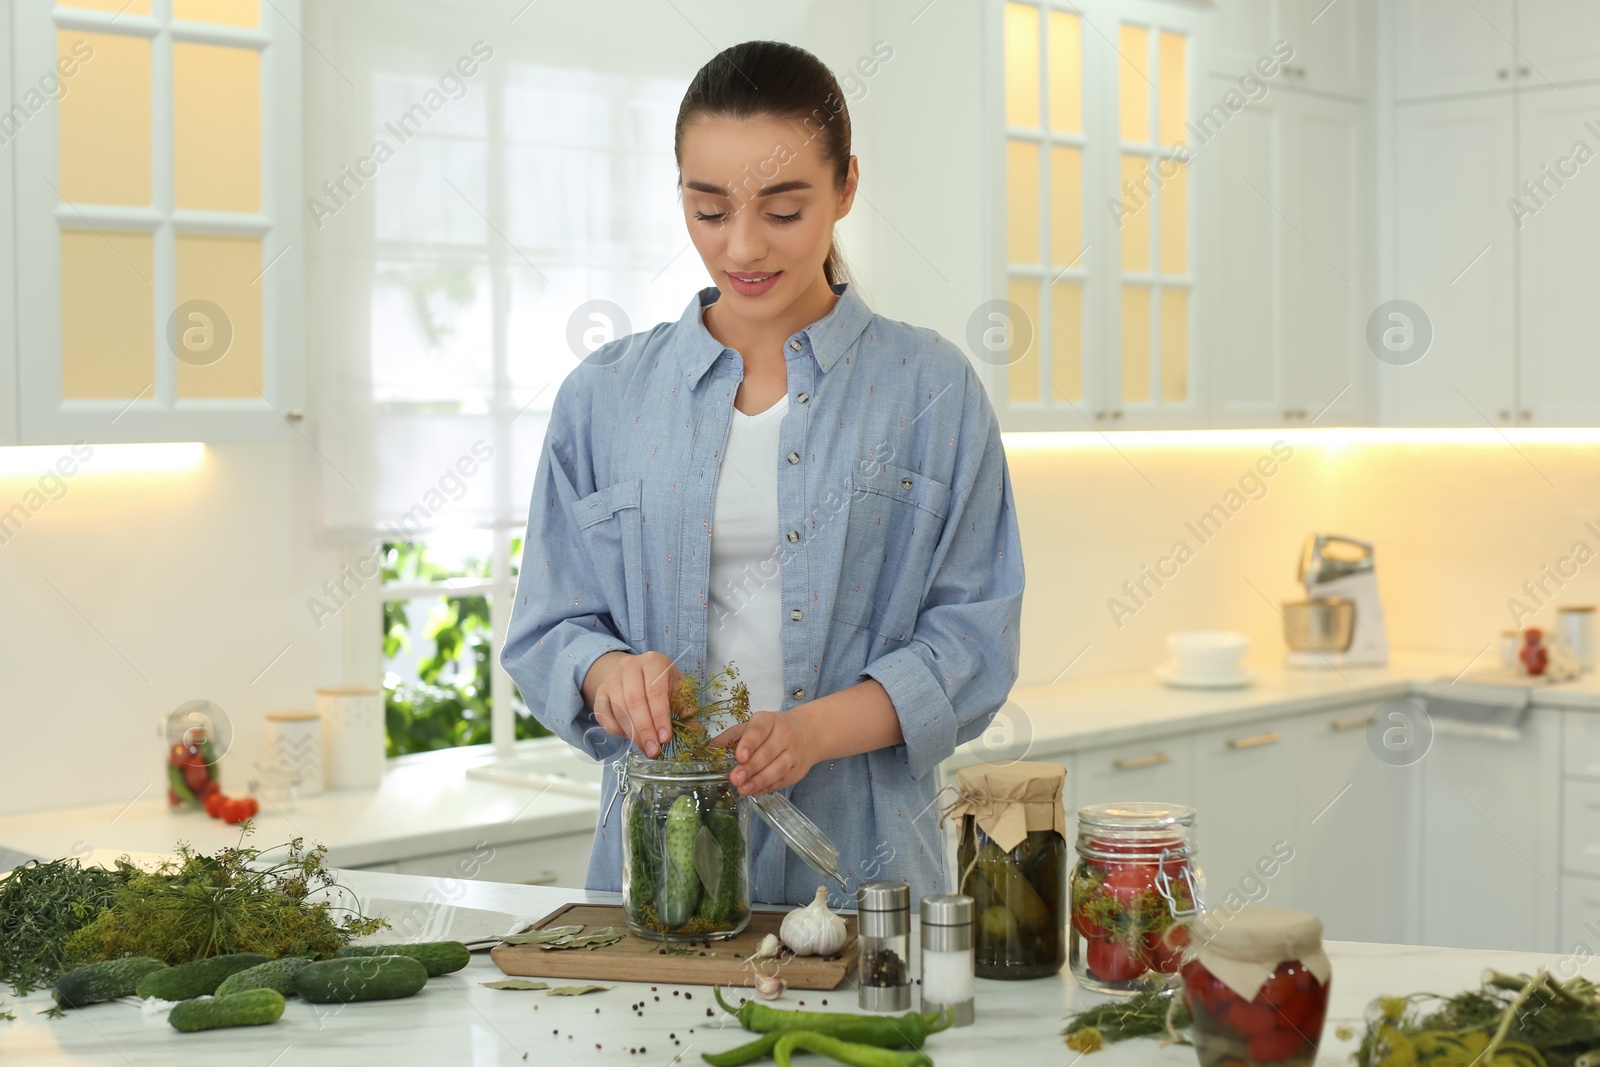 Photo of Woman putting dill into pickling jar at table in kitchen